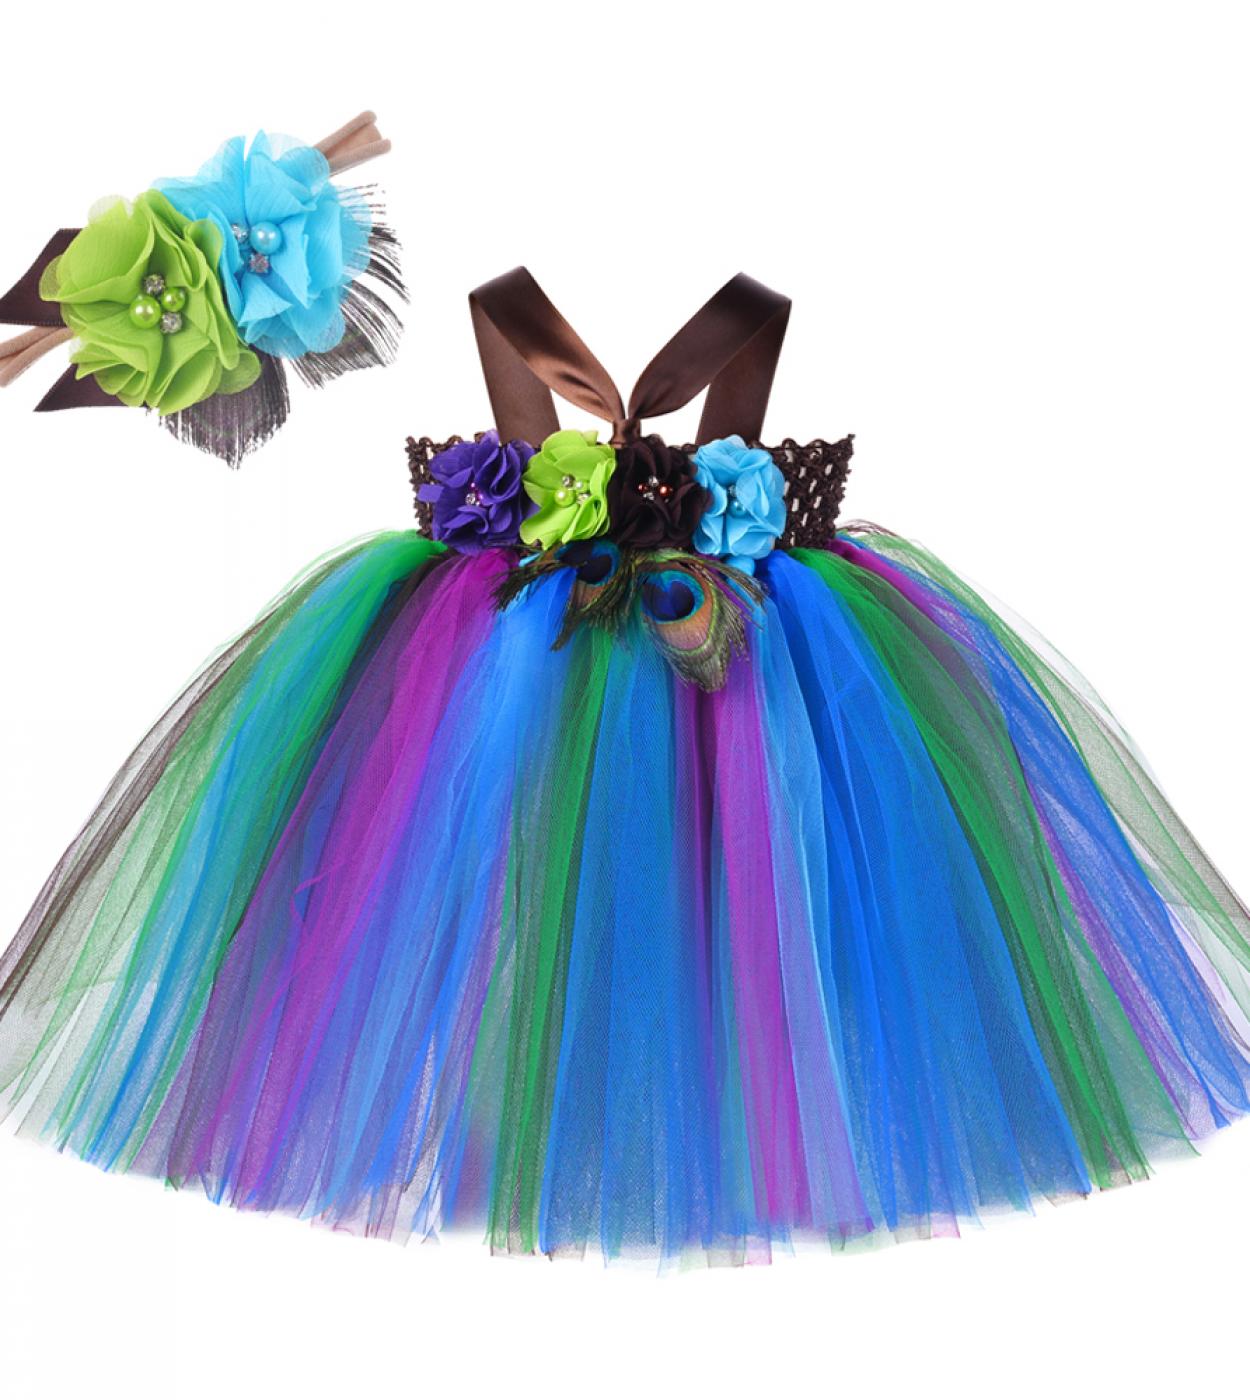 Baby Girls Tutu Outfit For Birthday Photoshoot Tutu Dress For Toddler Kids Photography Costume Flower Peacoak Party Gown